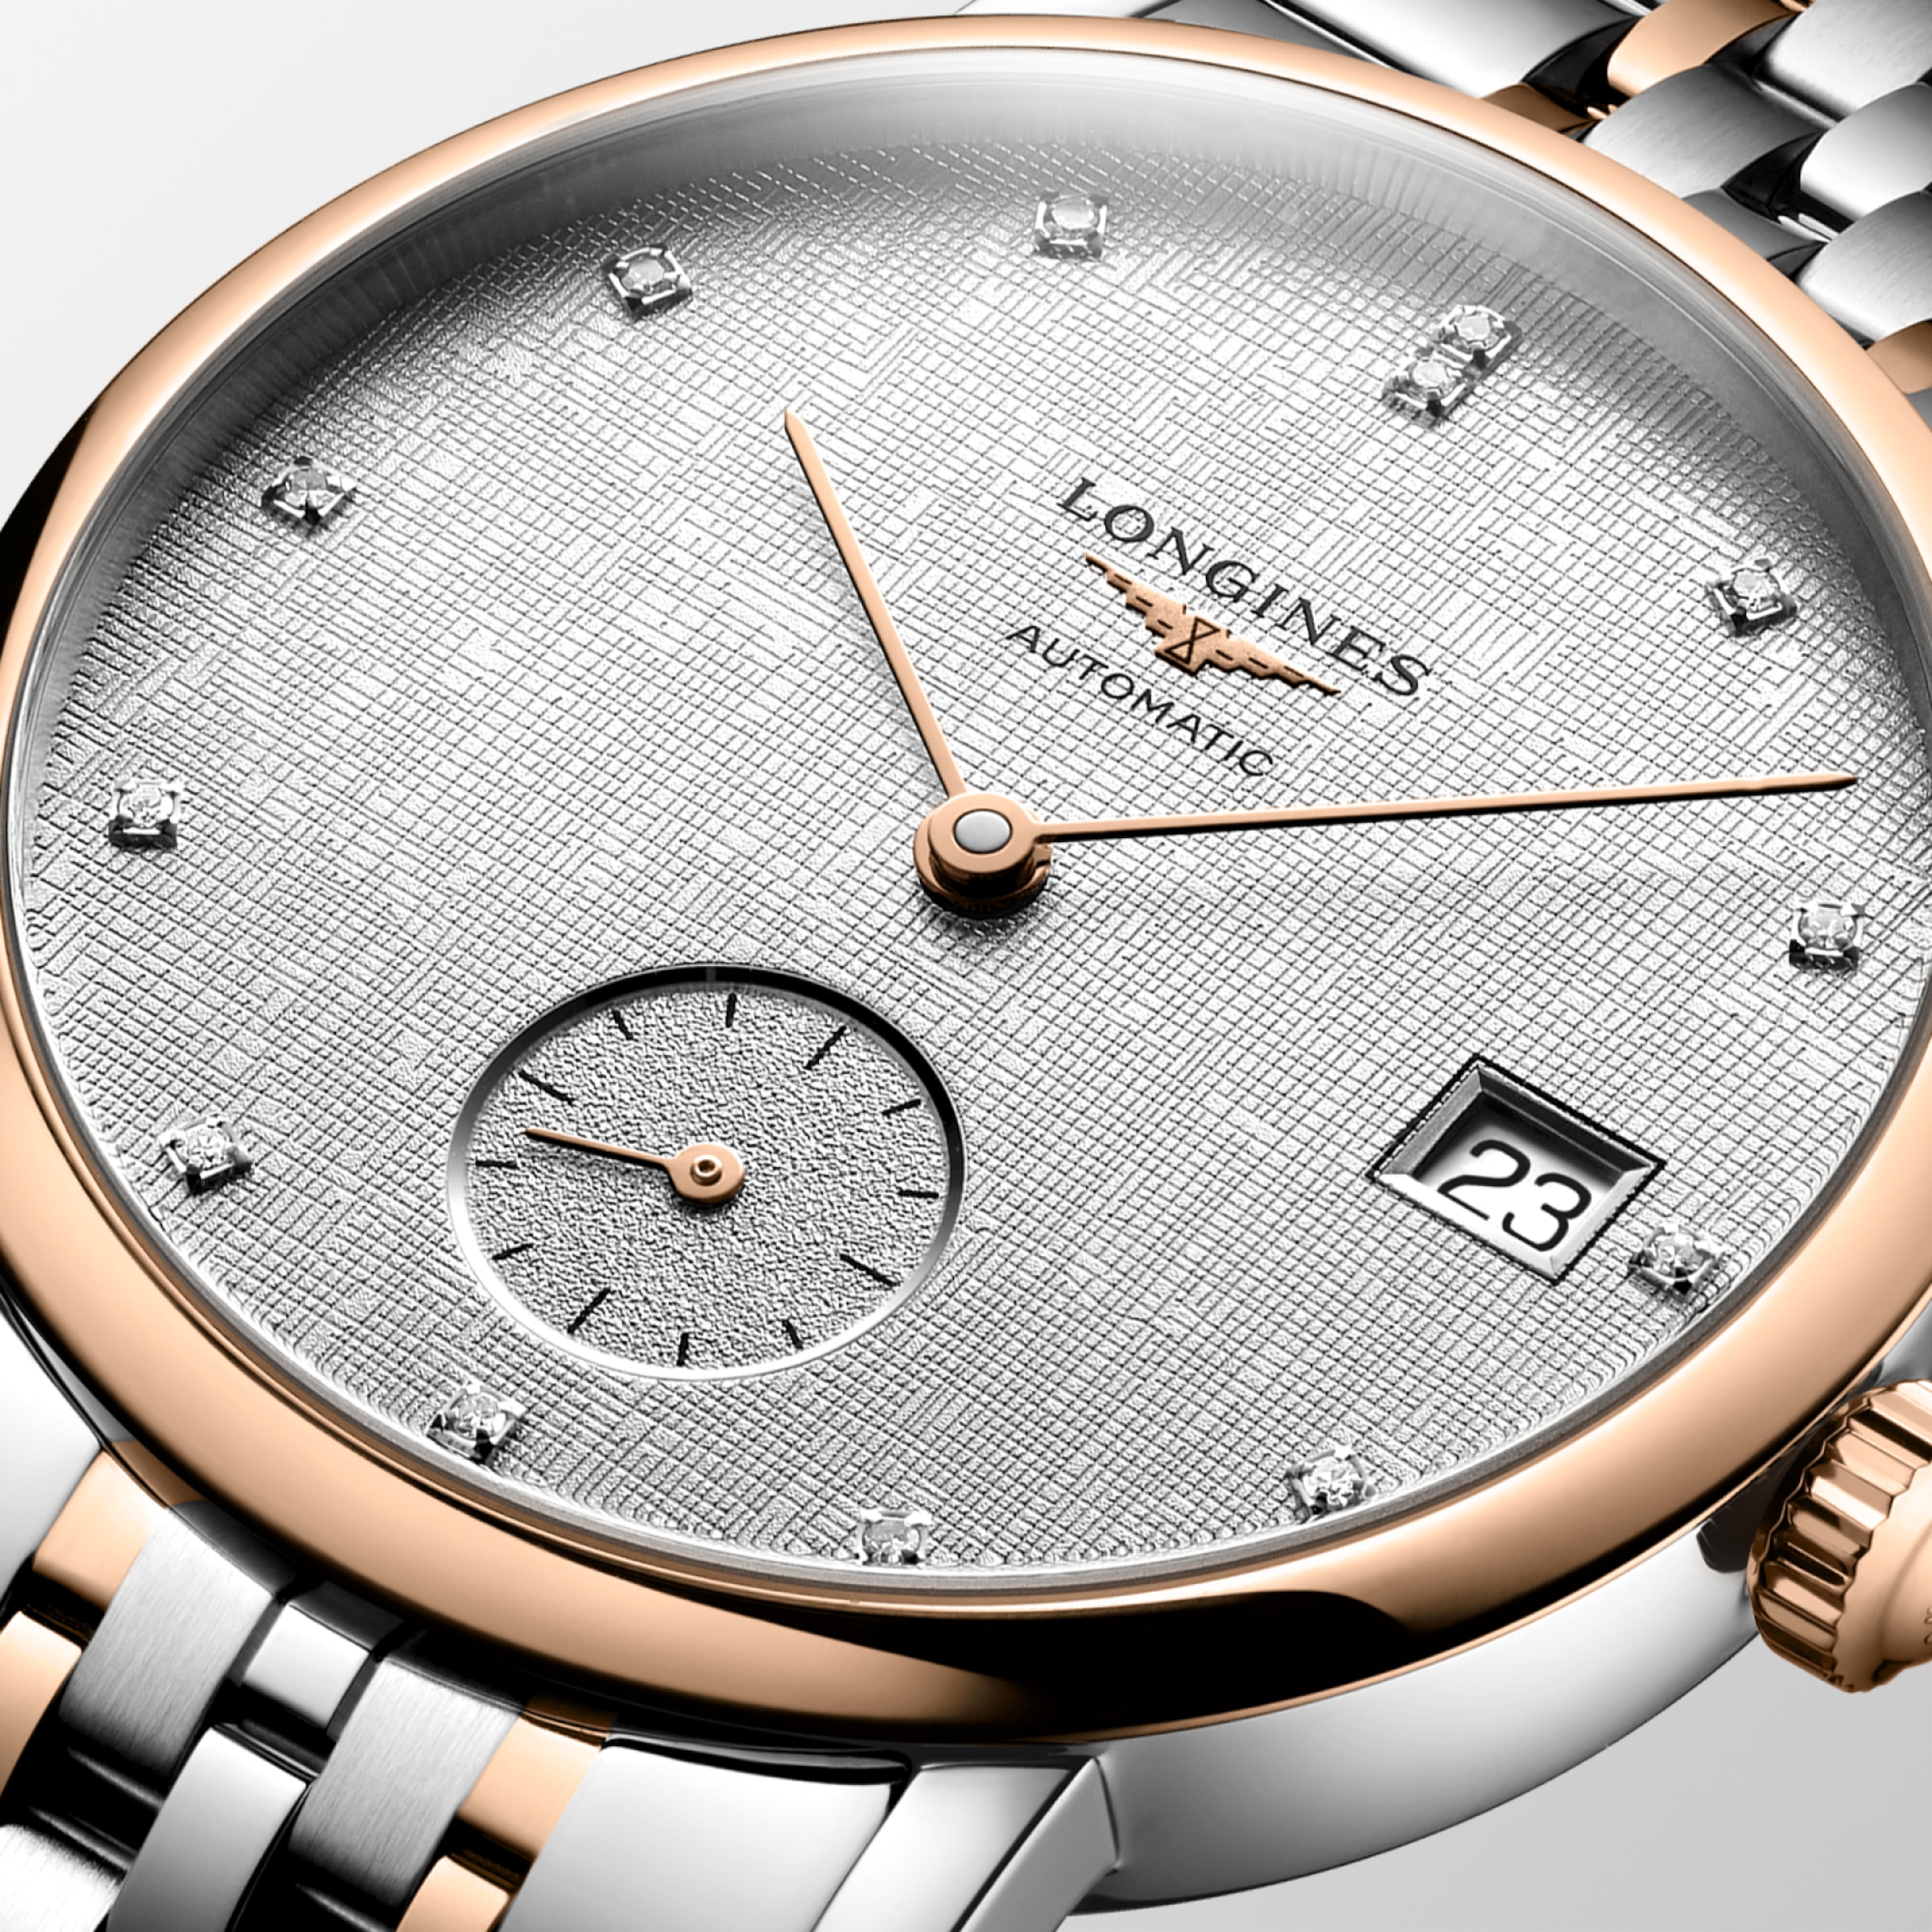 Longines ELEGANT COLLECTION Automatic Stainless steel and 18 karat pink gold cap 200 Watch - L4.312.5.77.7